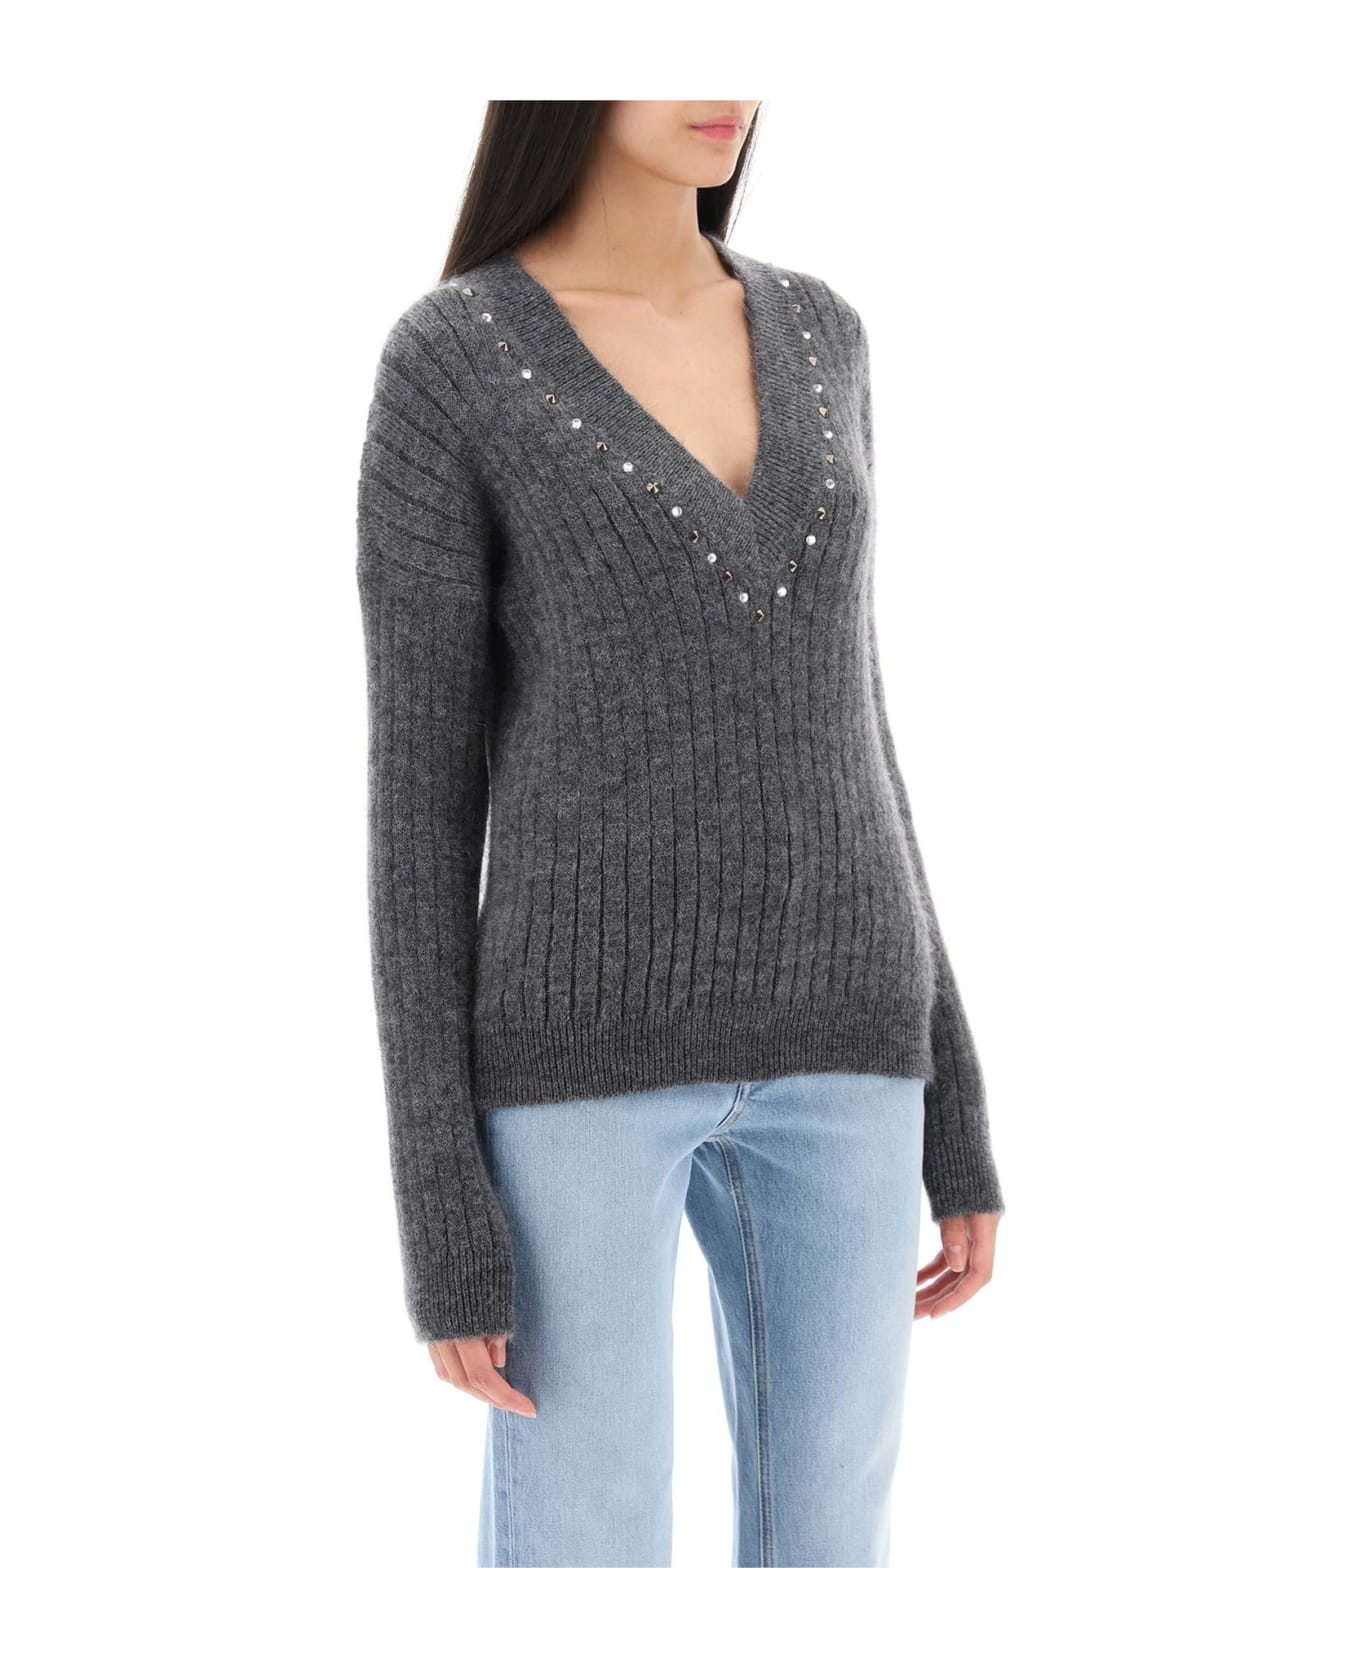 Alessandra Rich Wool Knit Sweater With Studs And Crystals - GREY MELANGE (Grey)